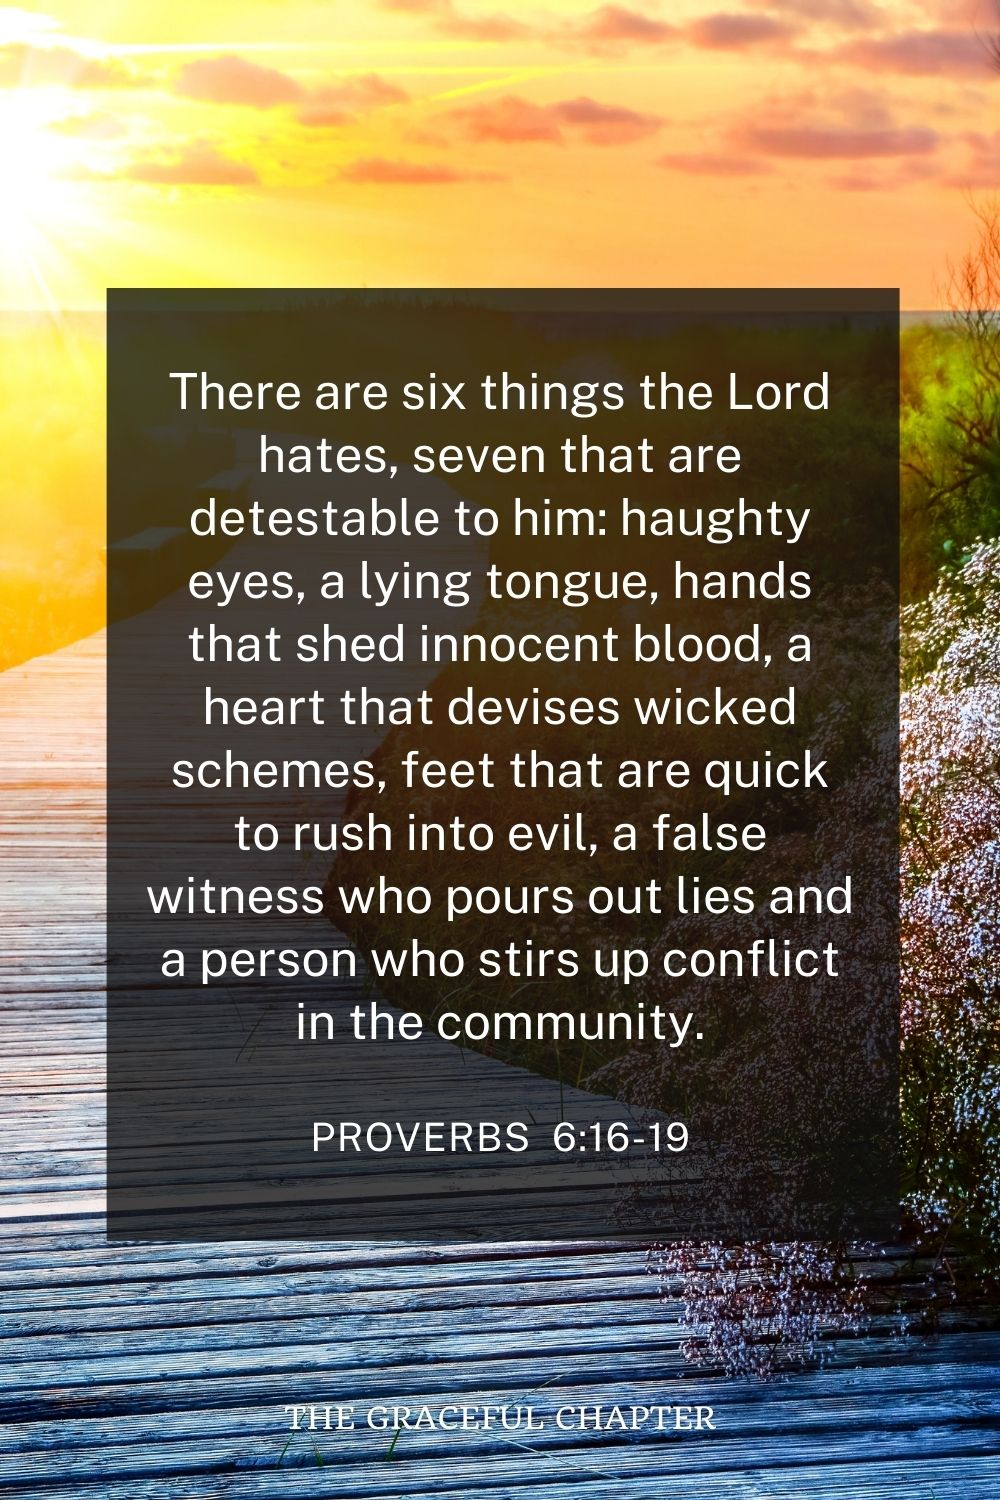 There are six things the Lord hates, seven that are detestable to him: haughty eyes, a lying tongue, hands that shed innocent blood, a heart that devises wicked schemes, feet that are quick to rush into evil, a false witness who pours out lies and a person who stirs up conflict in the community. Proverbs 6:16-19